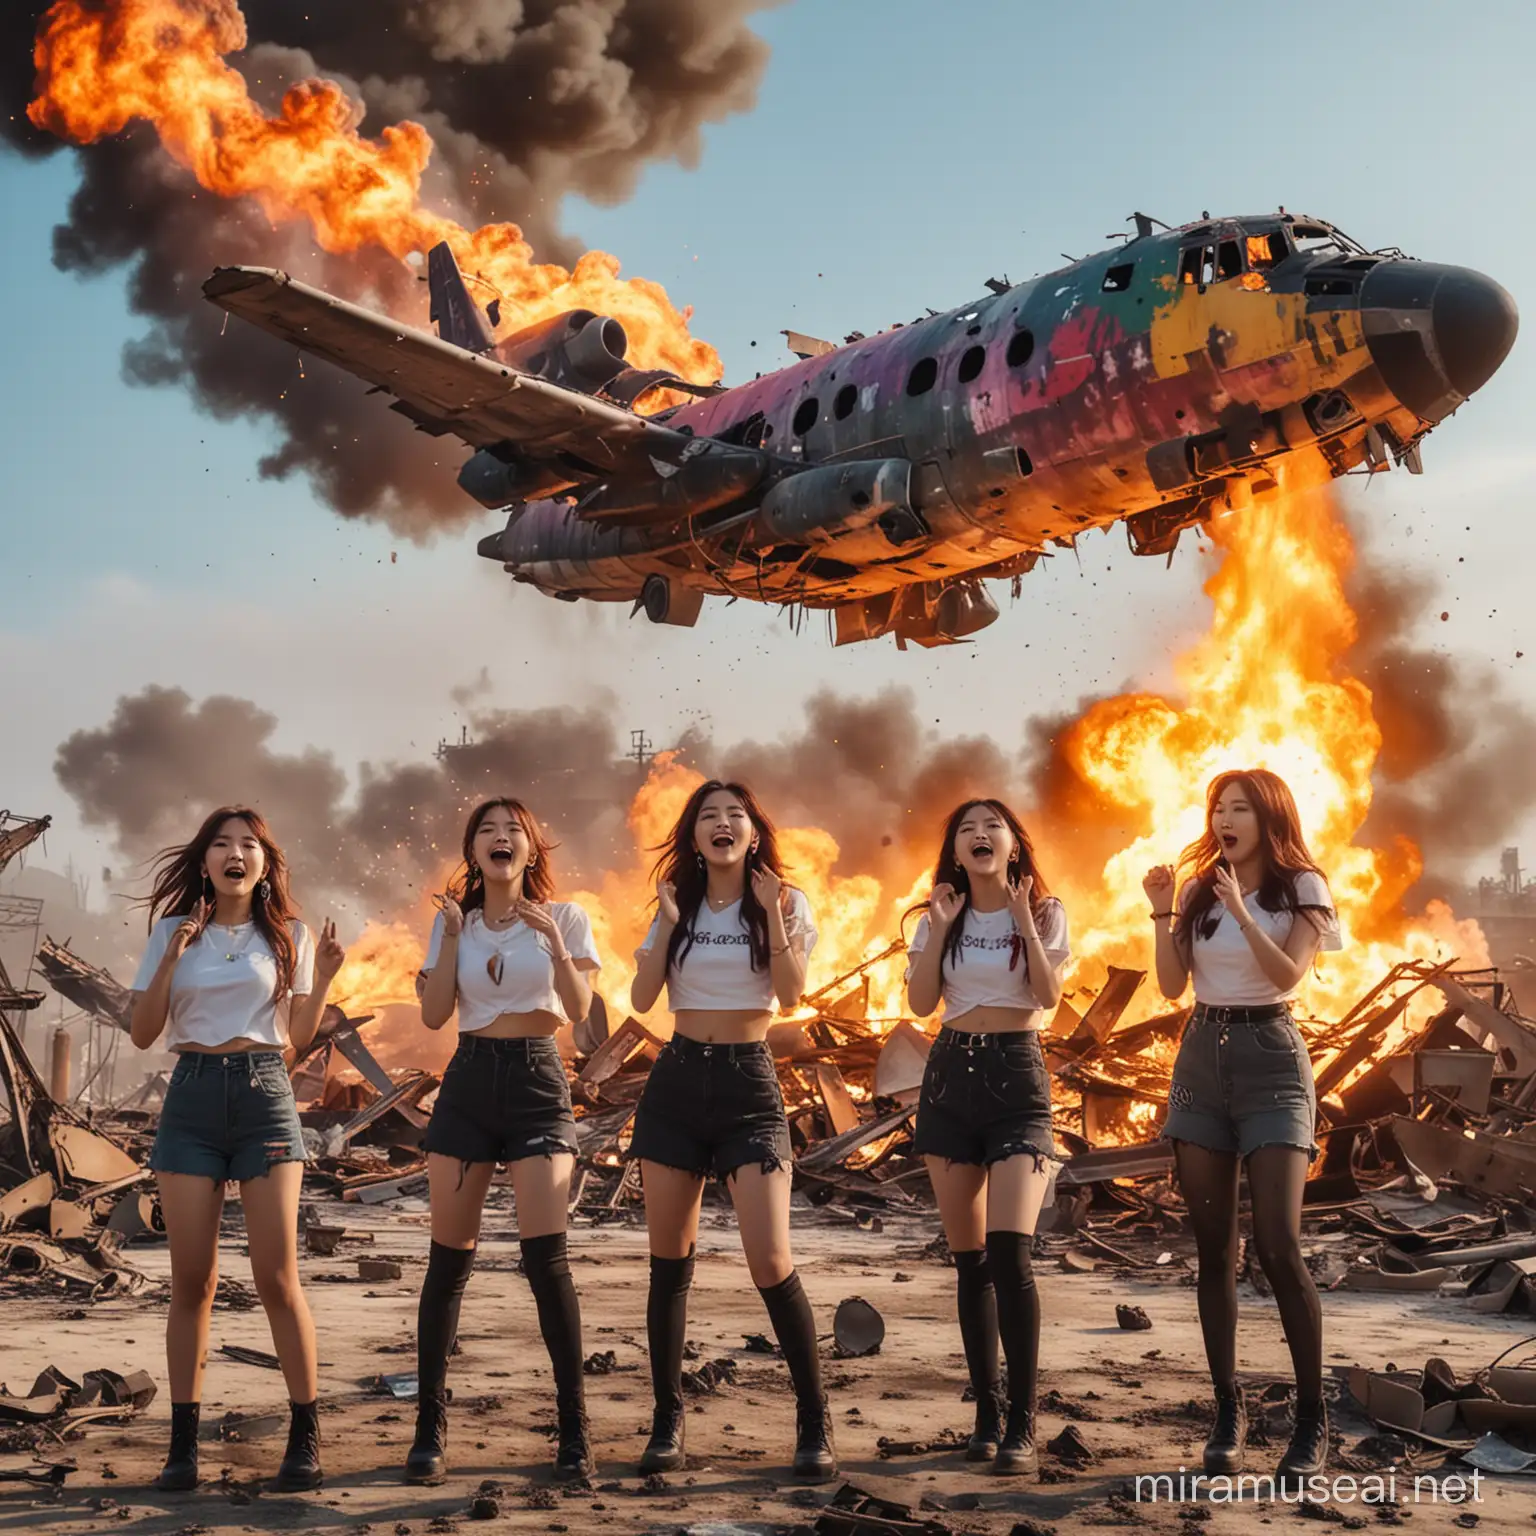 a female kpop group colorful and happy singing in front of a burning destroyed aircraft with explosions and war in the background
